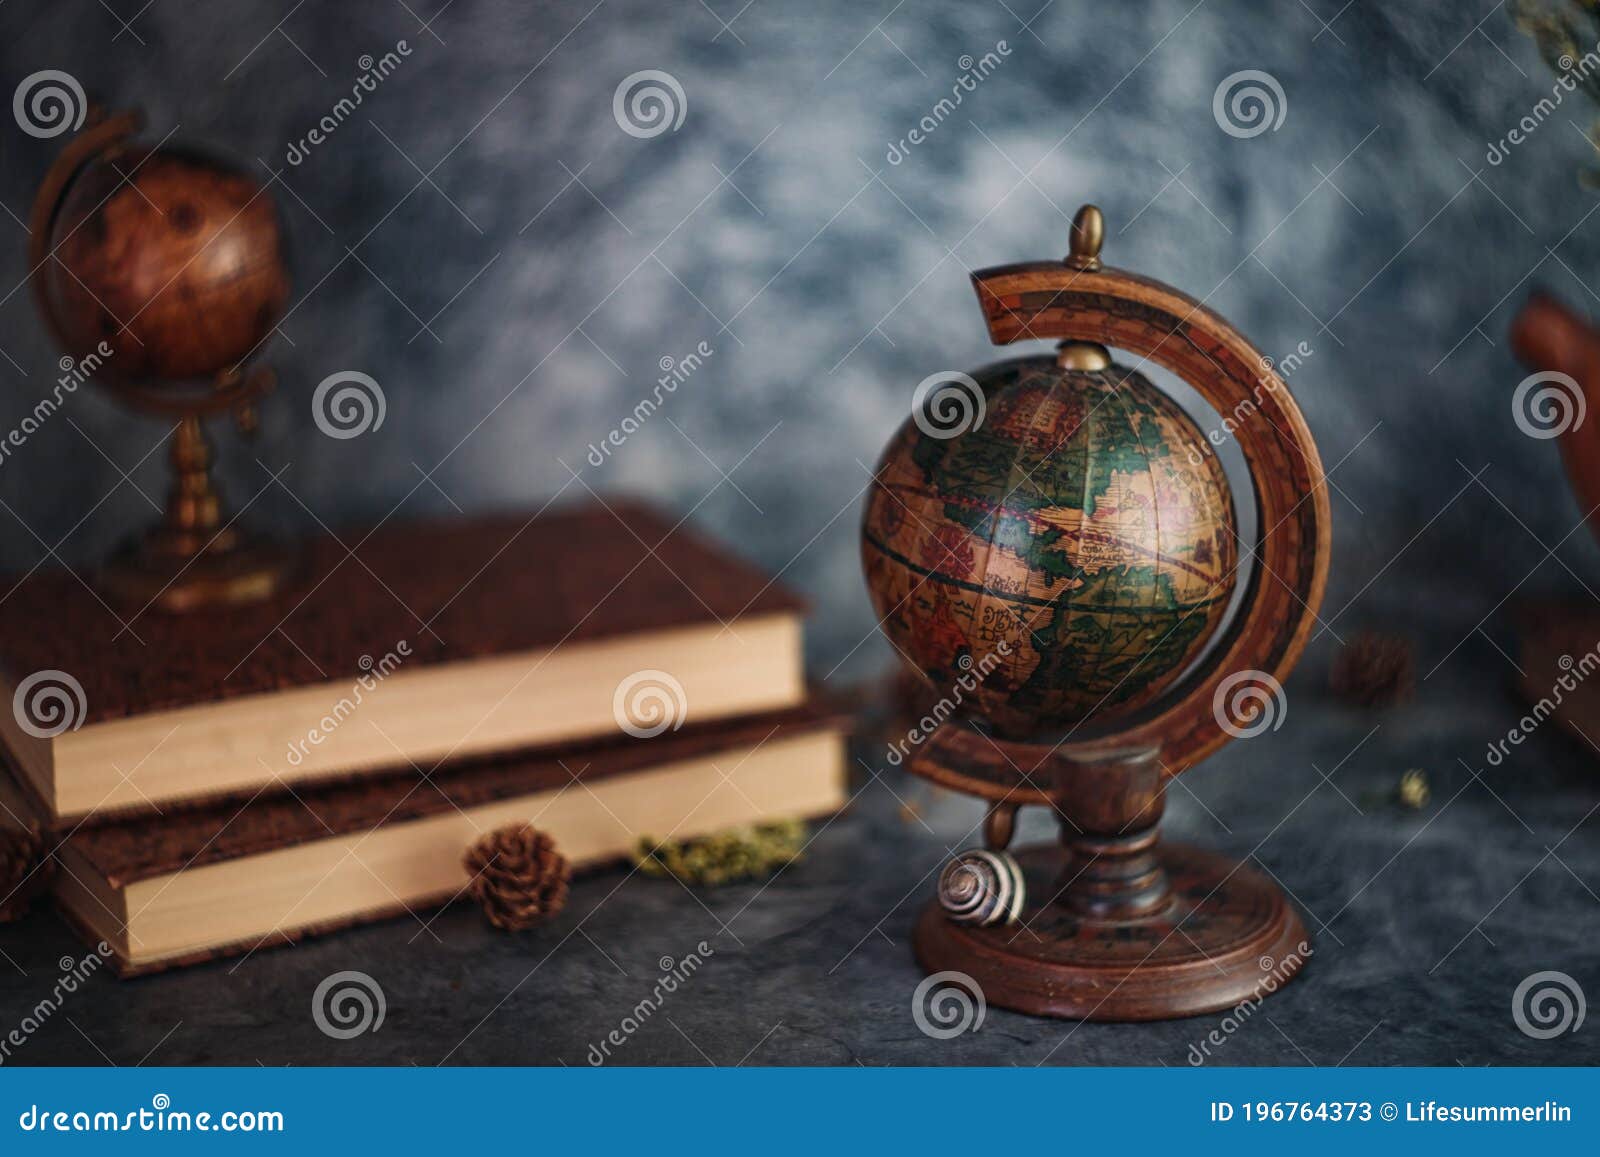 fineart concept shot. stilllife with rustic books  with flowers and globe on grey backgrounds